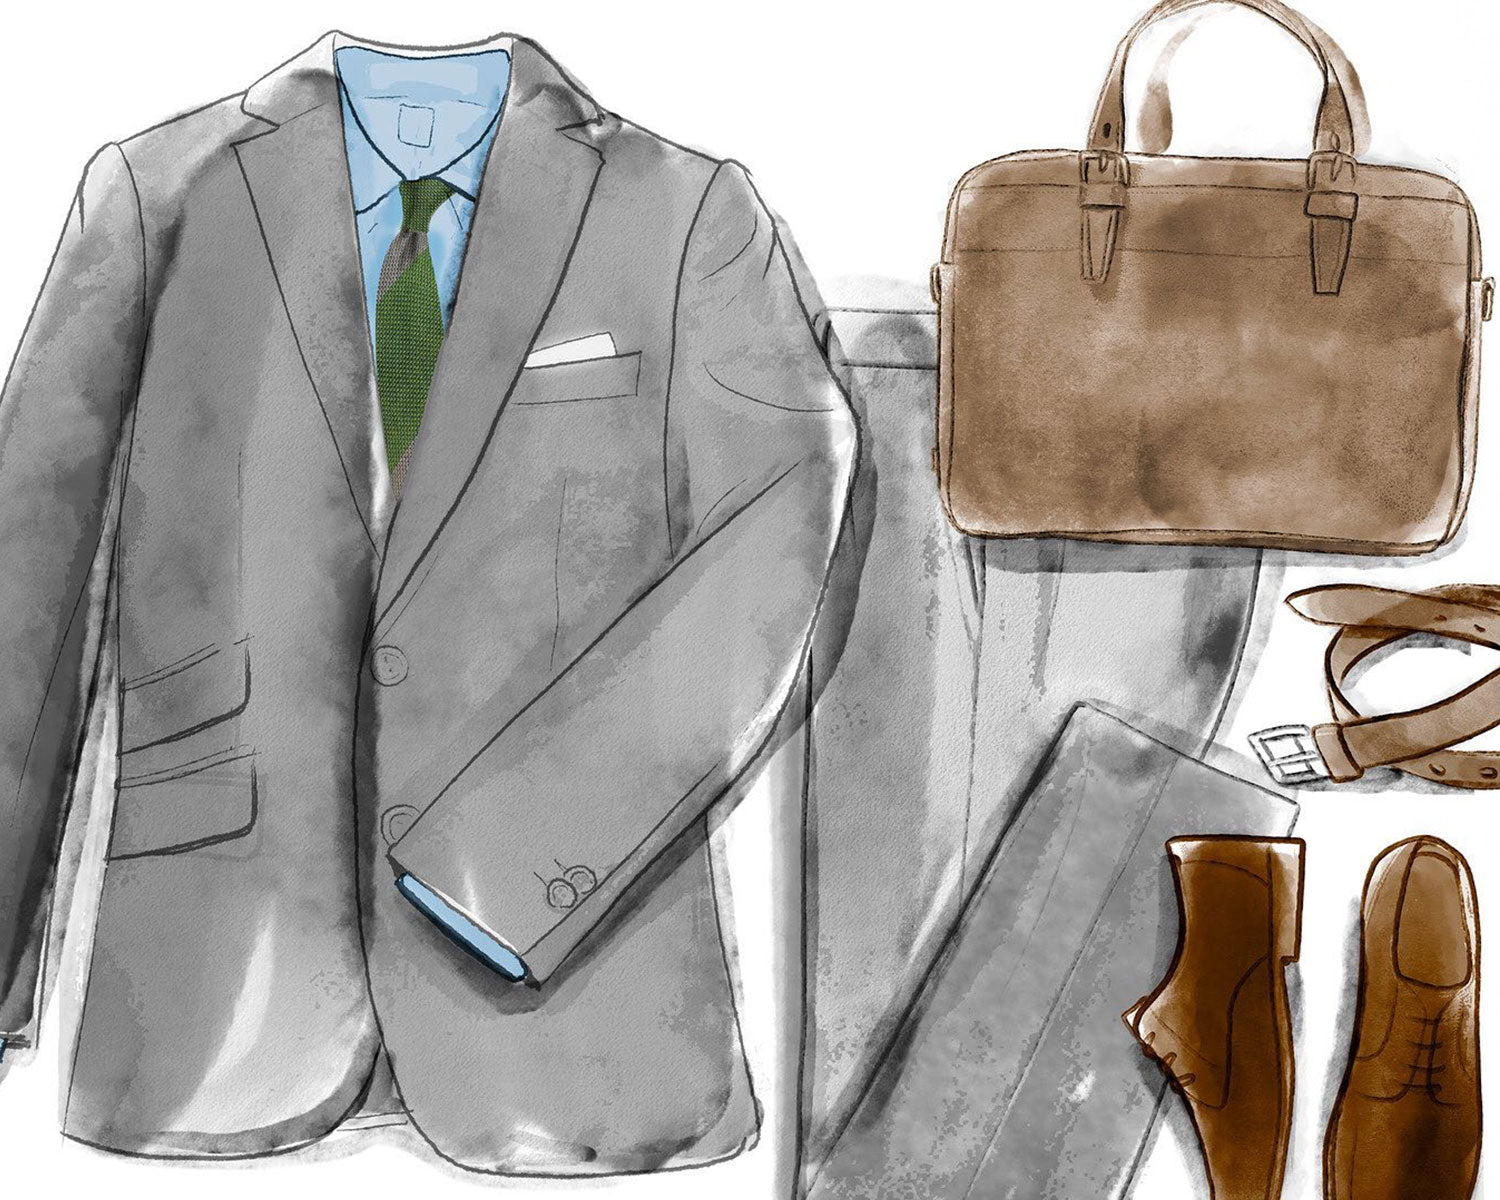 Illustration of a grey suit with green tie, shoes and bag